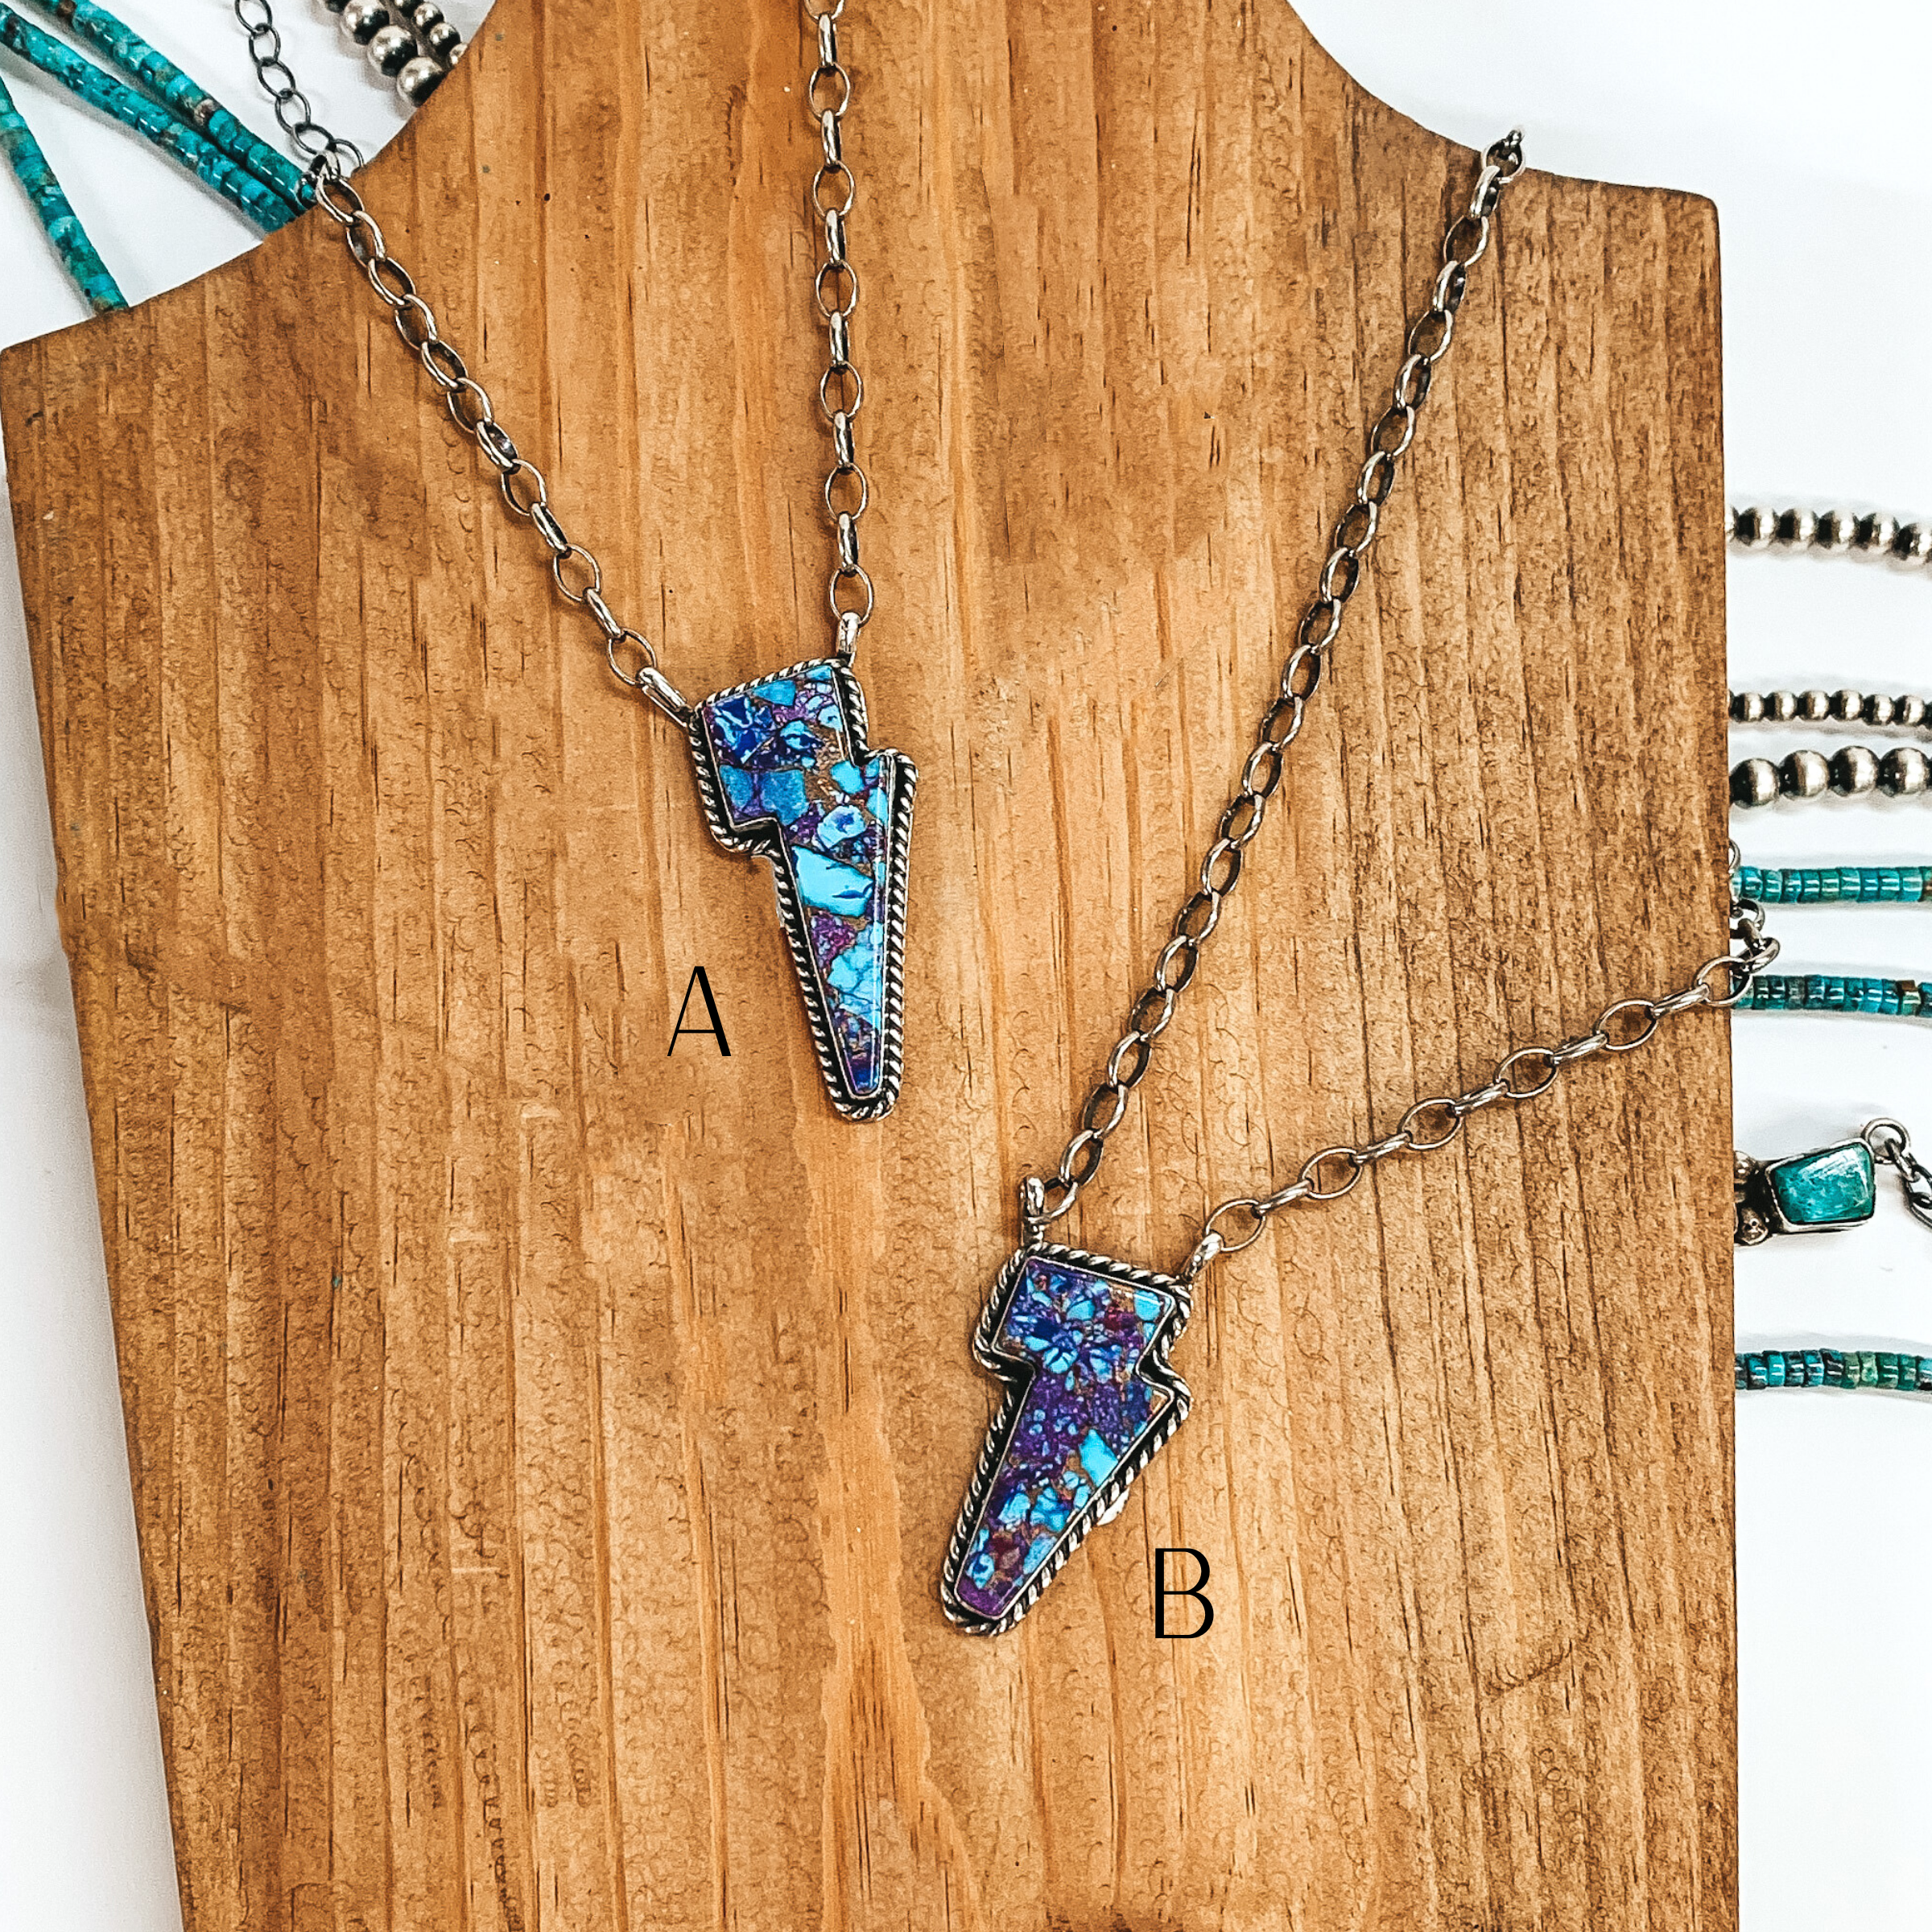 Donovan Skeets | Navajo Handmade Sterling Silver Necklace with Purple Mojave and Turquoise Remix Lightning Bolt Pendant - Giddy Up Glamour Boutique